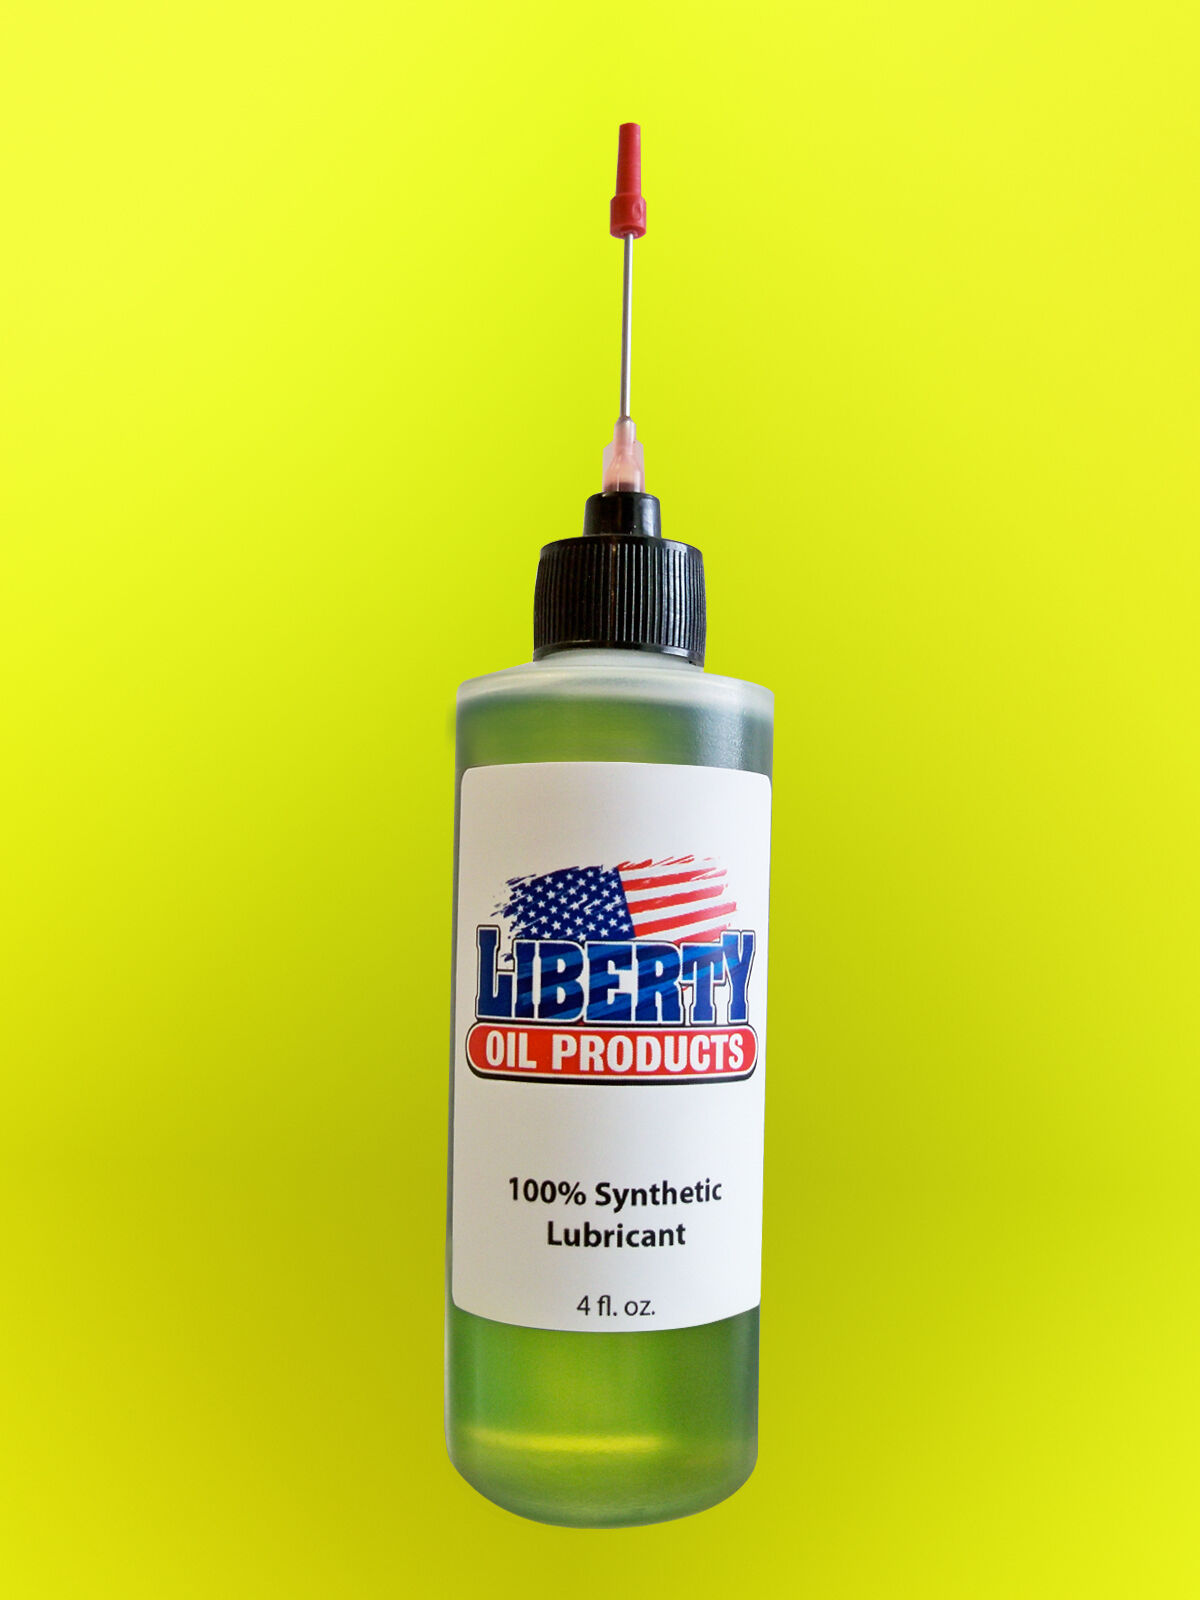 The best 4oz Bottle of 100% Synthetic Oil for lubricating American Flyer trains